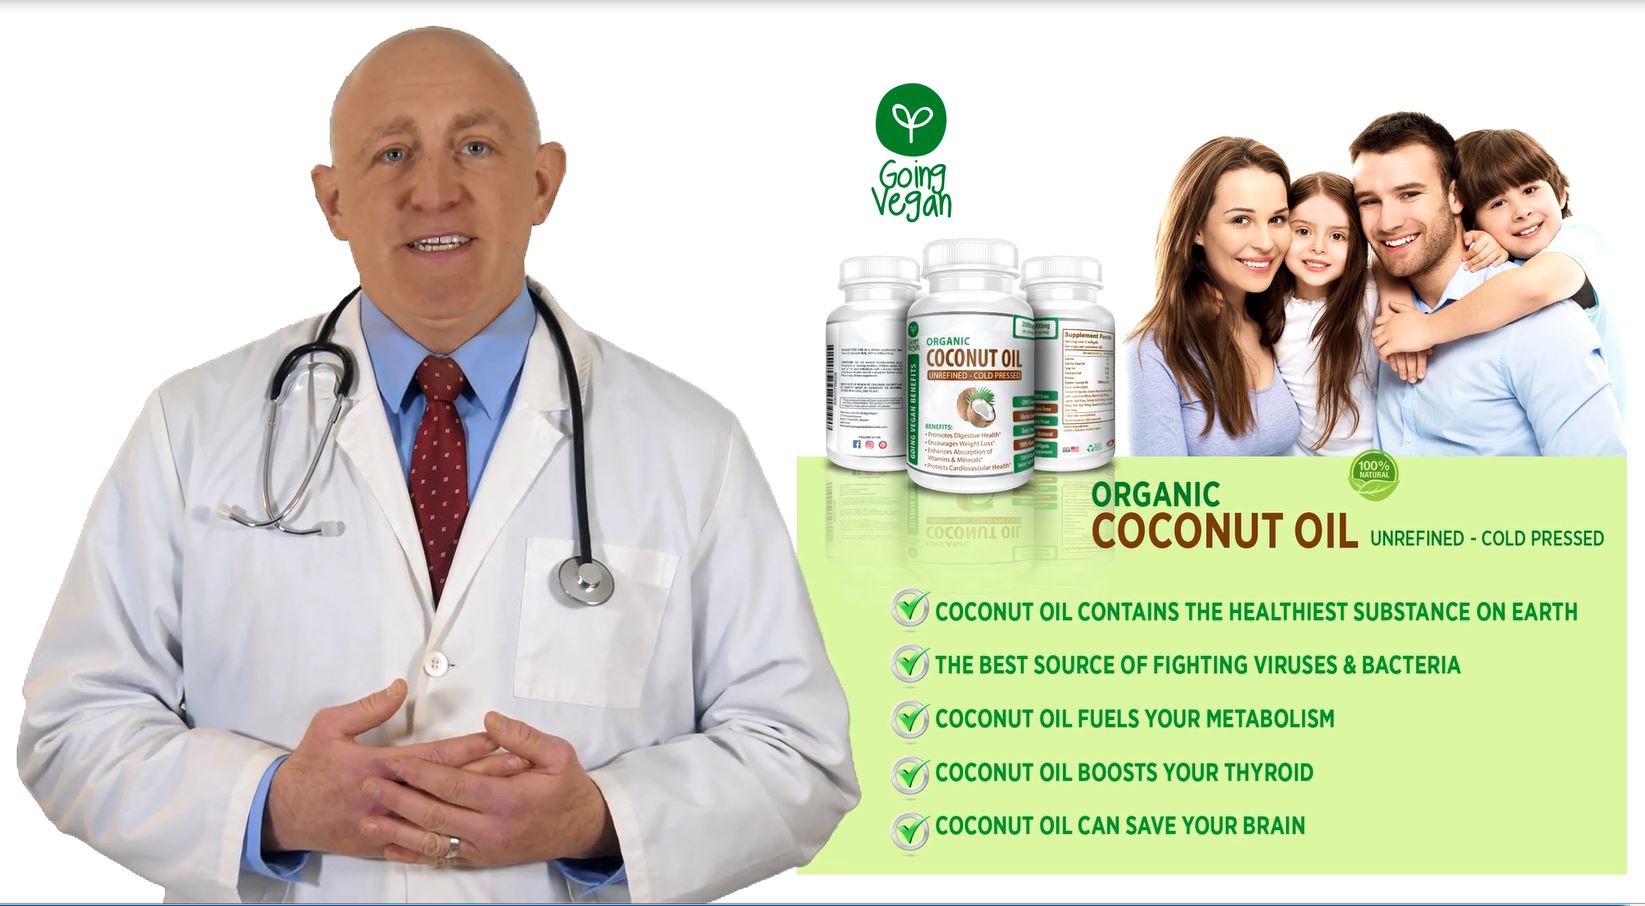 9 Reasons To Use Organic Coconut Oil Daily – 3 Of These Are Shocking!